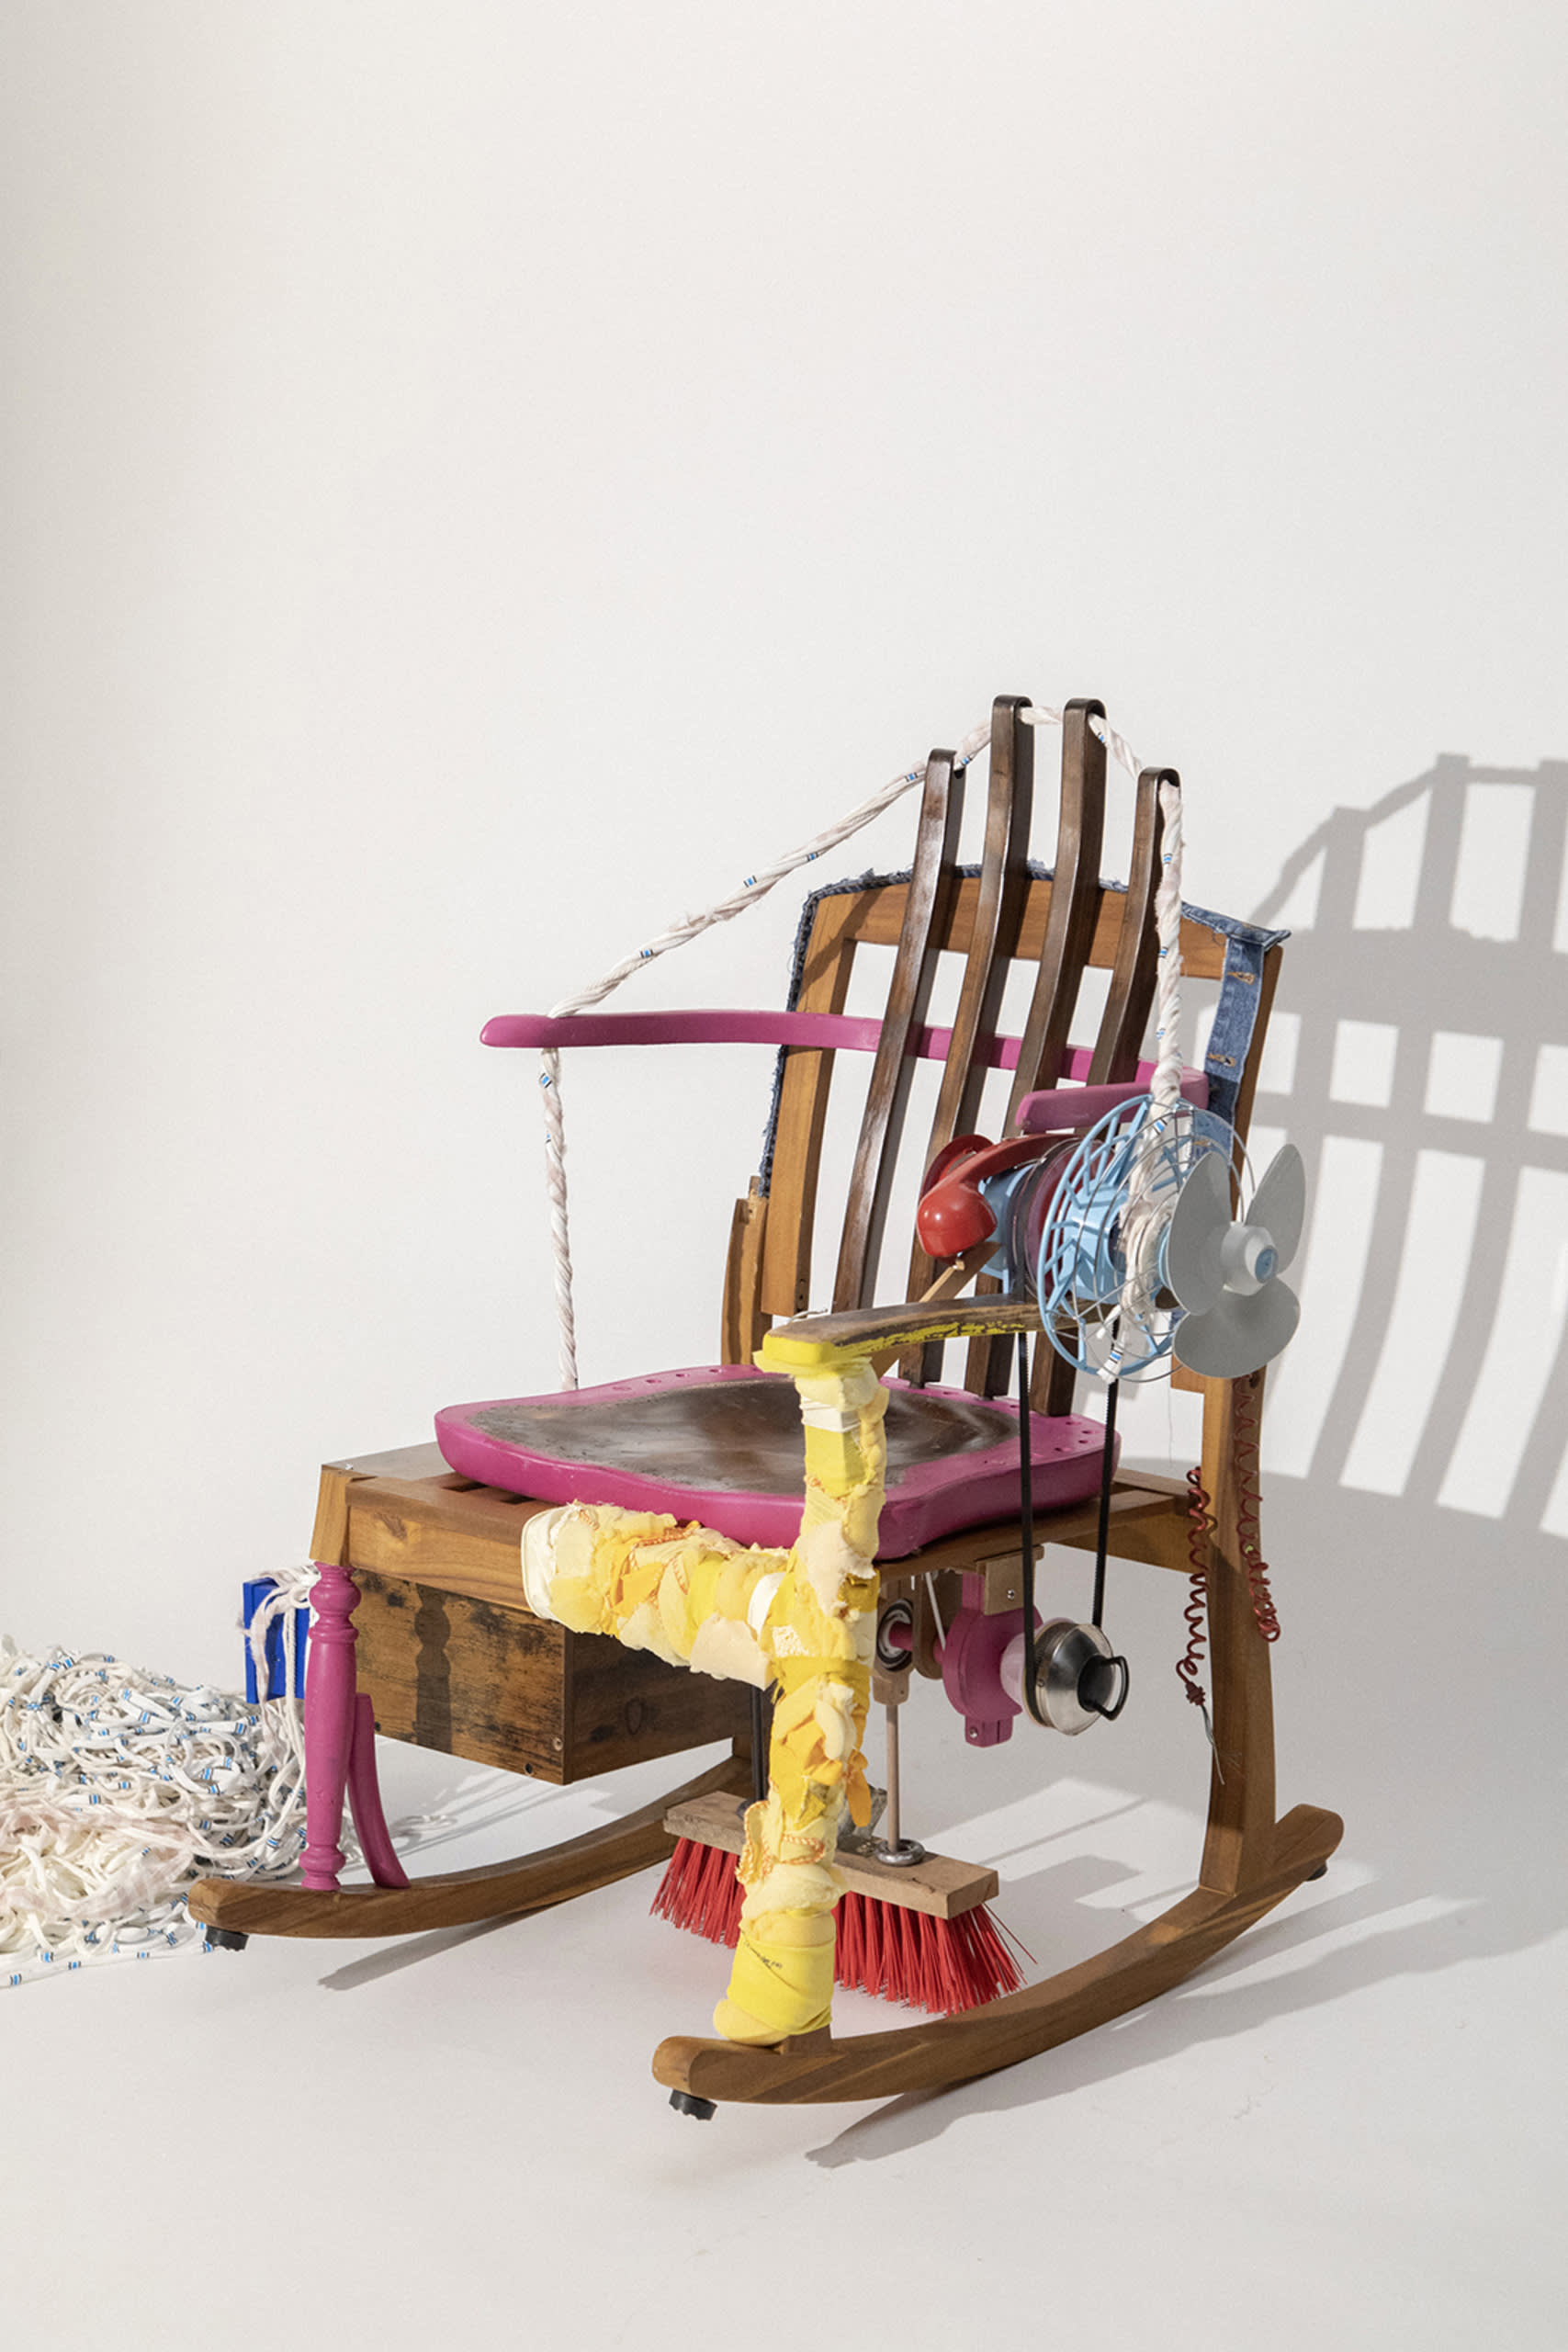 the photo of the yarn spinning rocking chair